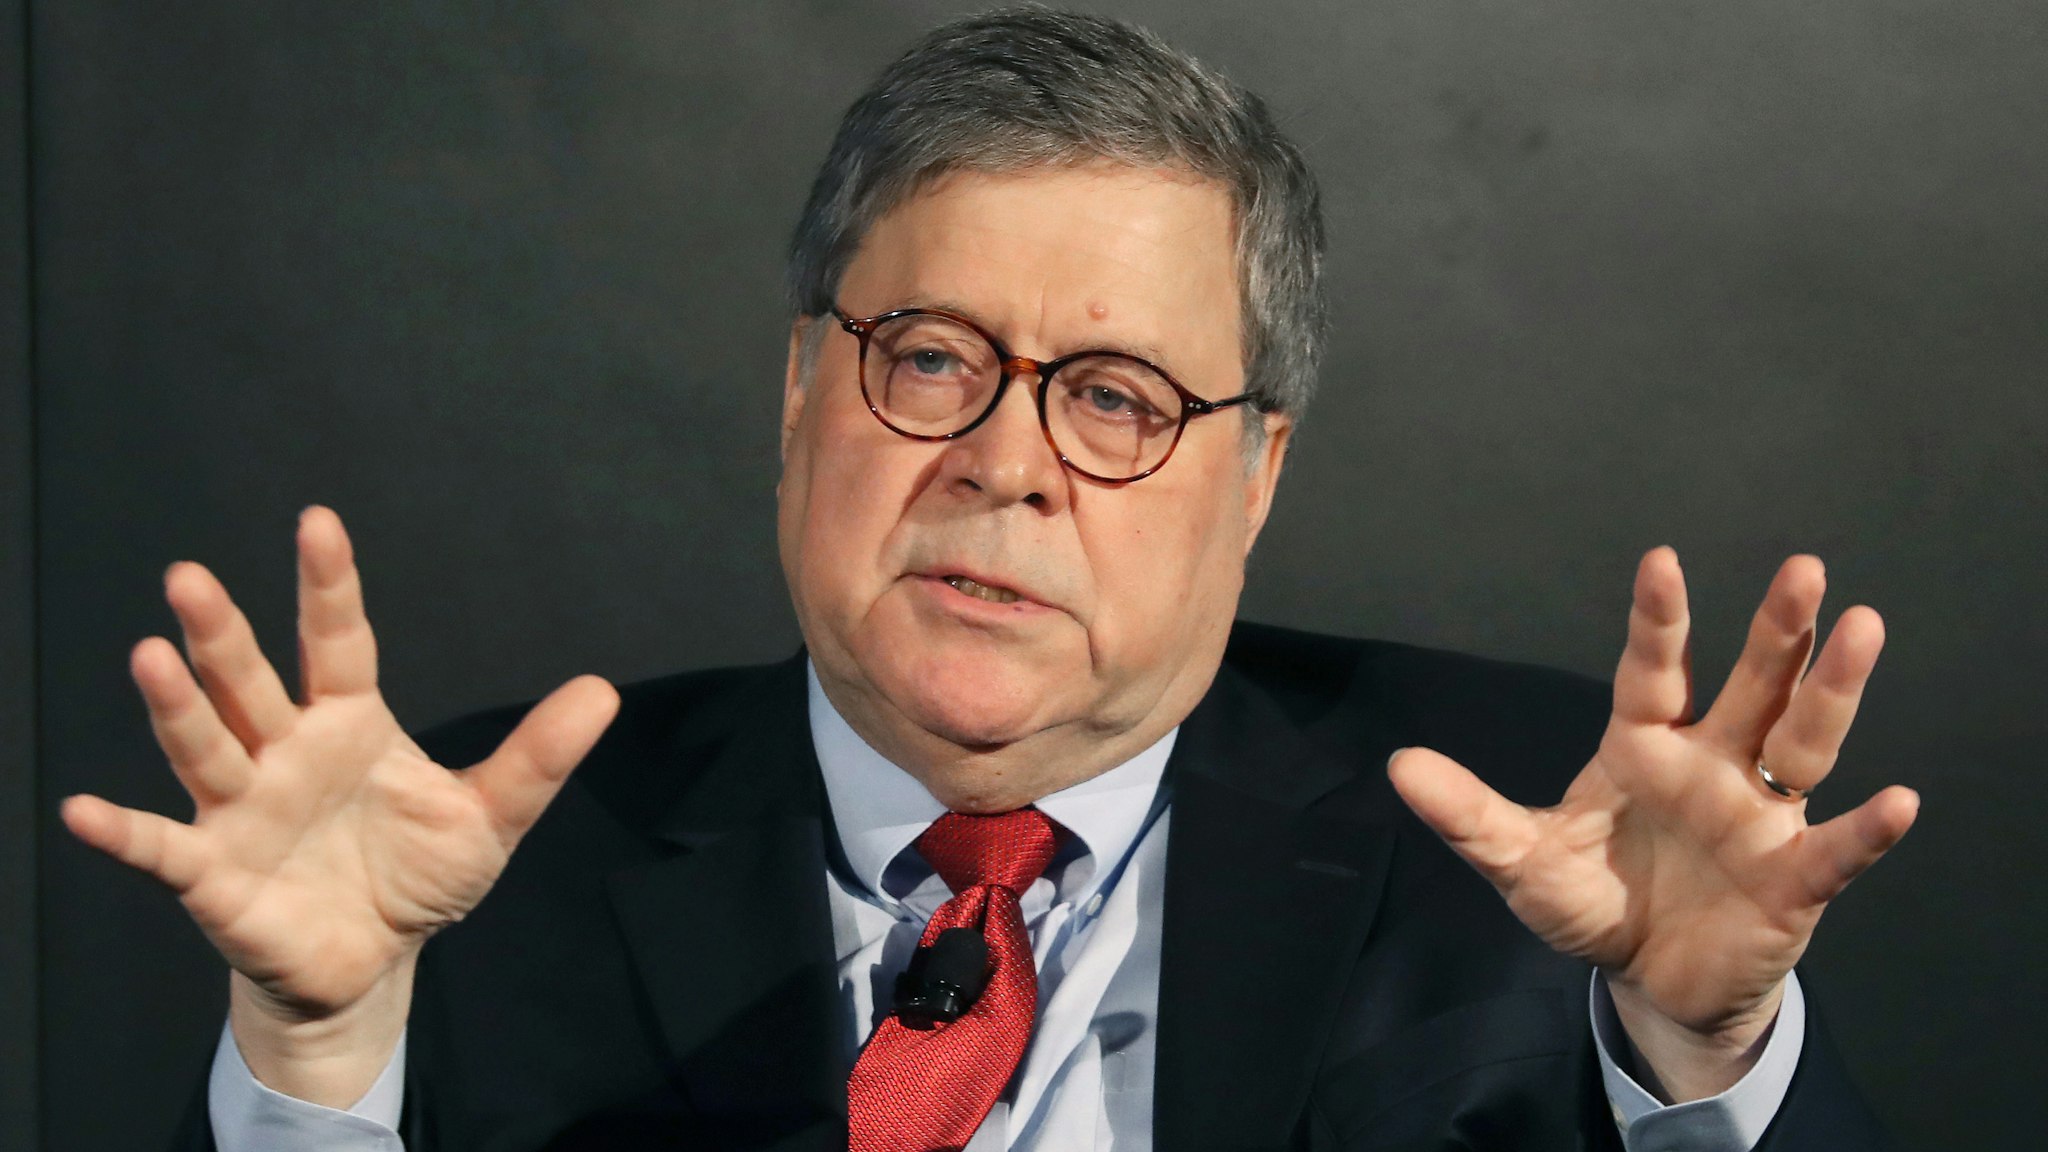 U.S. Attorney General William Barr speaks about the Justice Department's Russia investigation into the 2016 presidential campaign, during the Wall Street Journal's annual CEO Council meeting, at the Four Seasons Hotel on December 10, 2019 in Washington, DC.